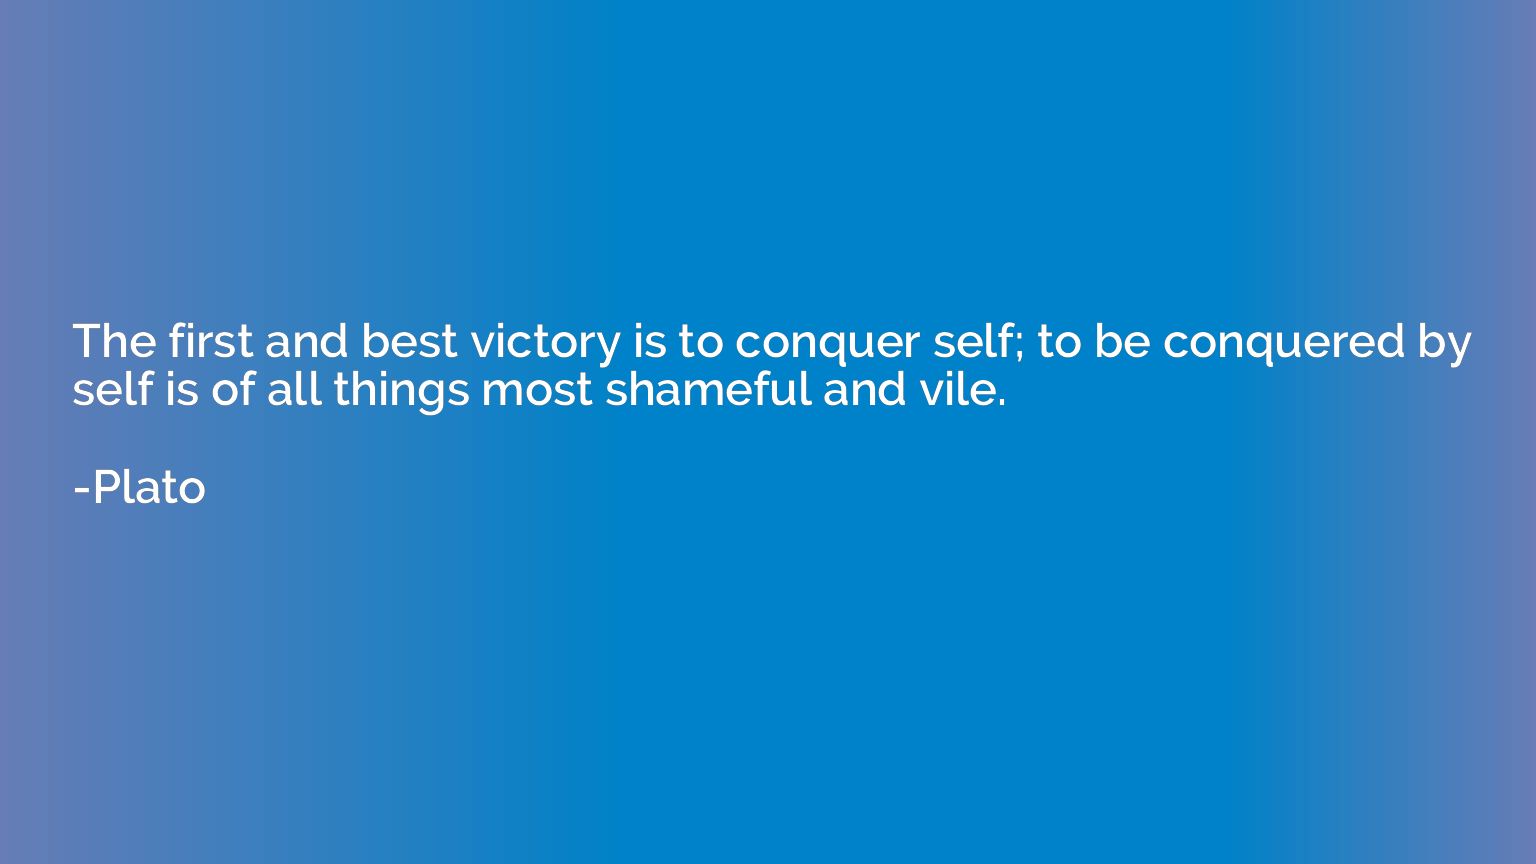 The first and best victory is to conquer self; to be conquer